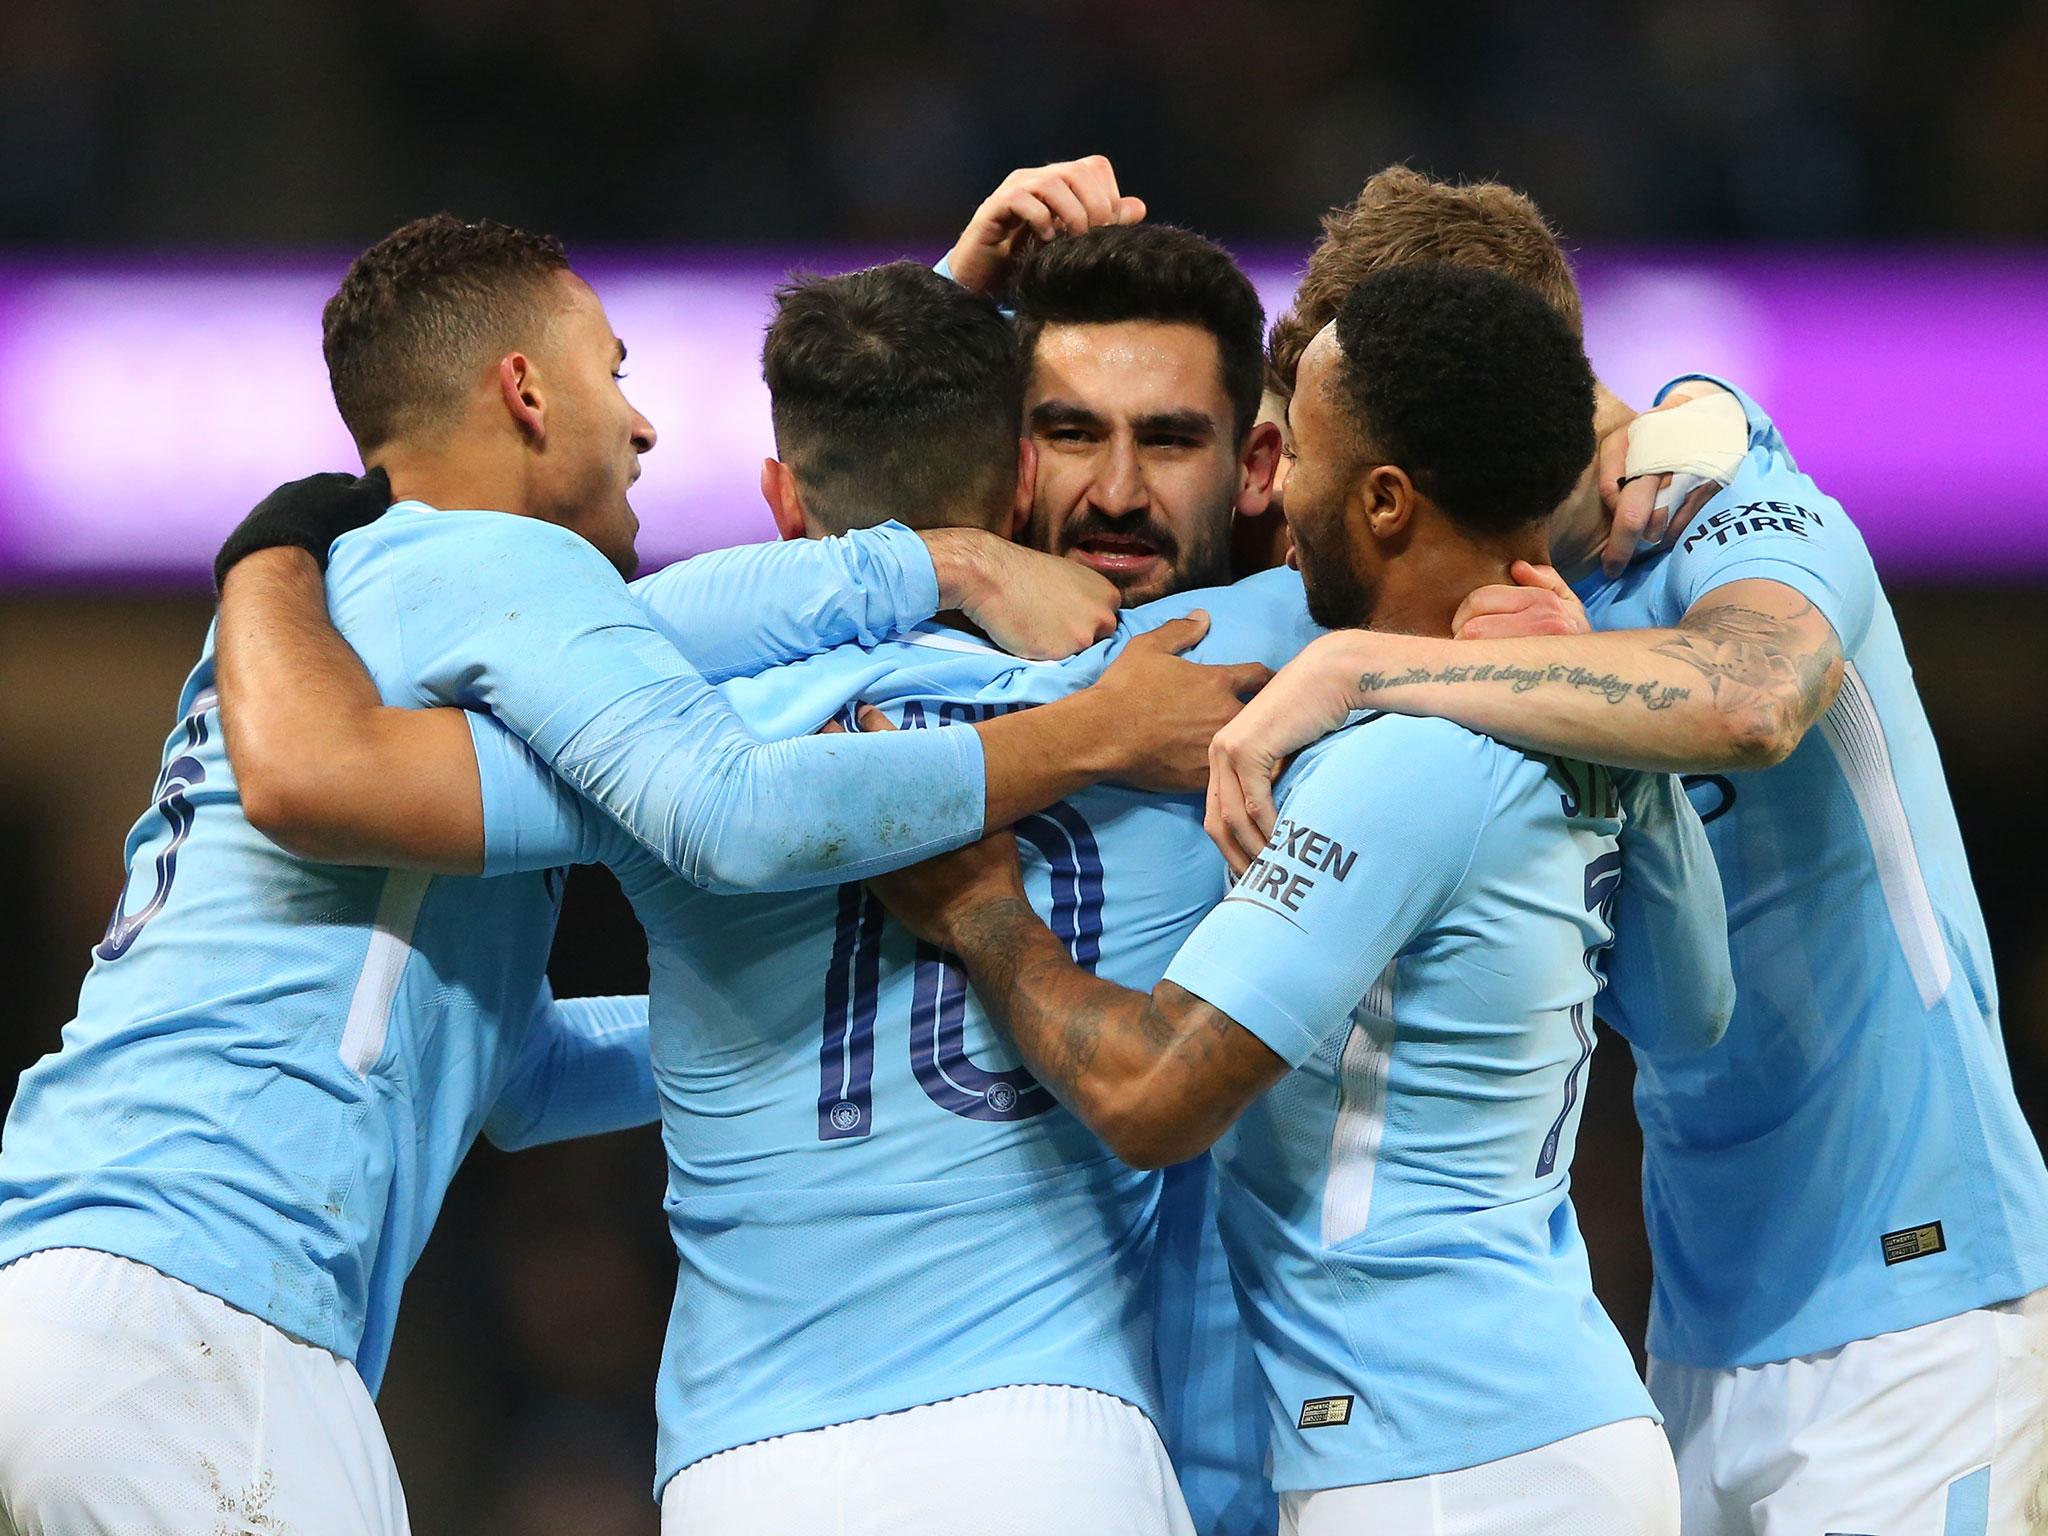 Manchester City's celebrate together after drawing level with Burnley on Saturday